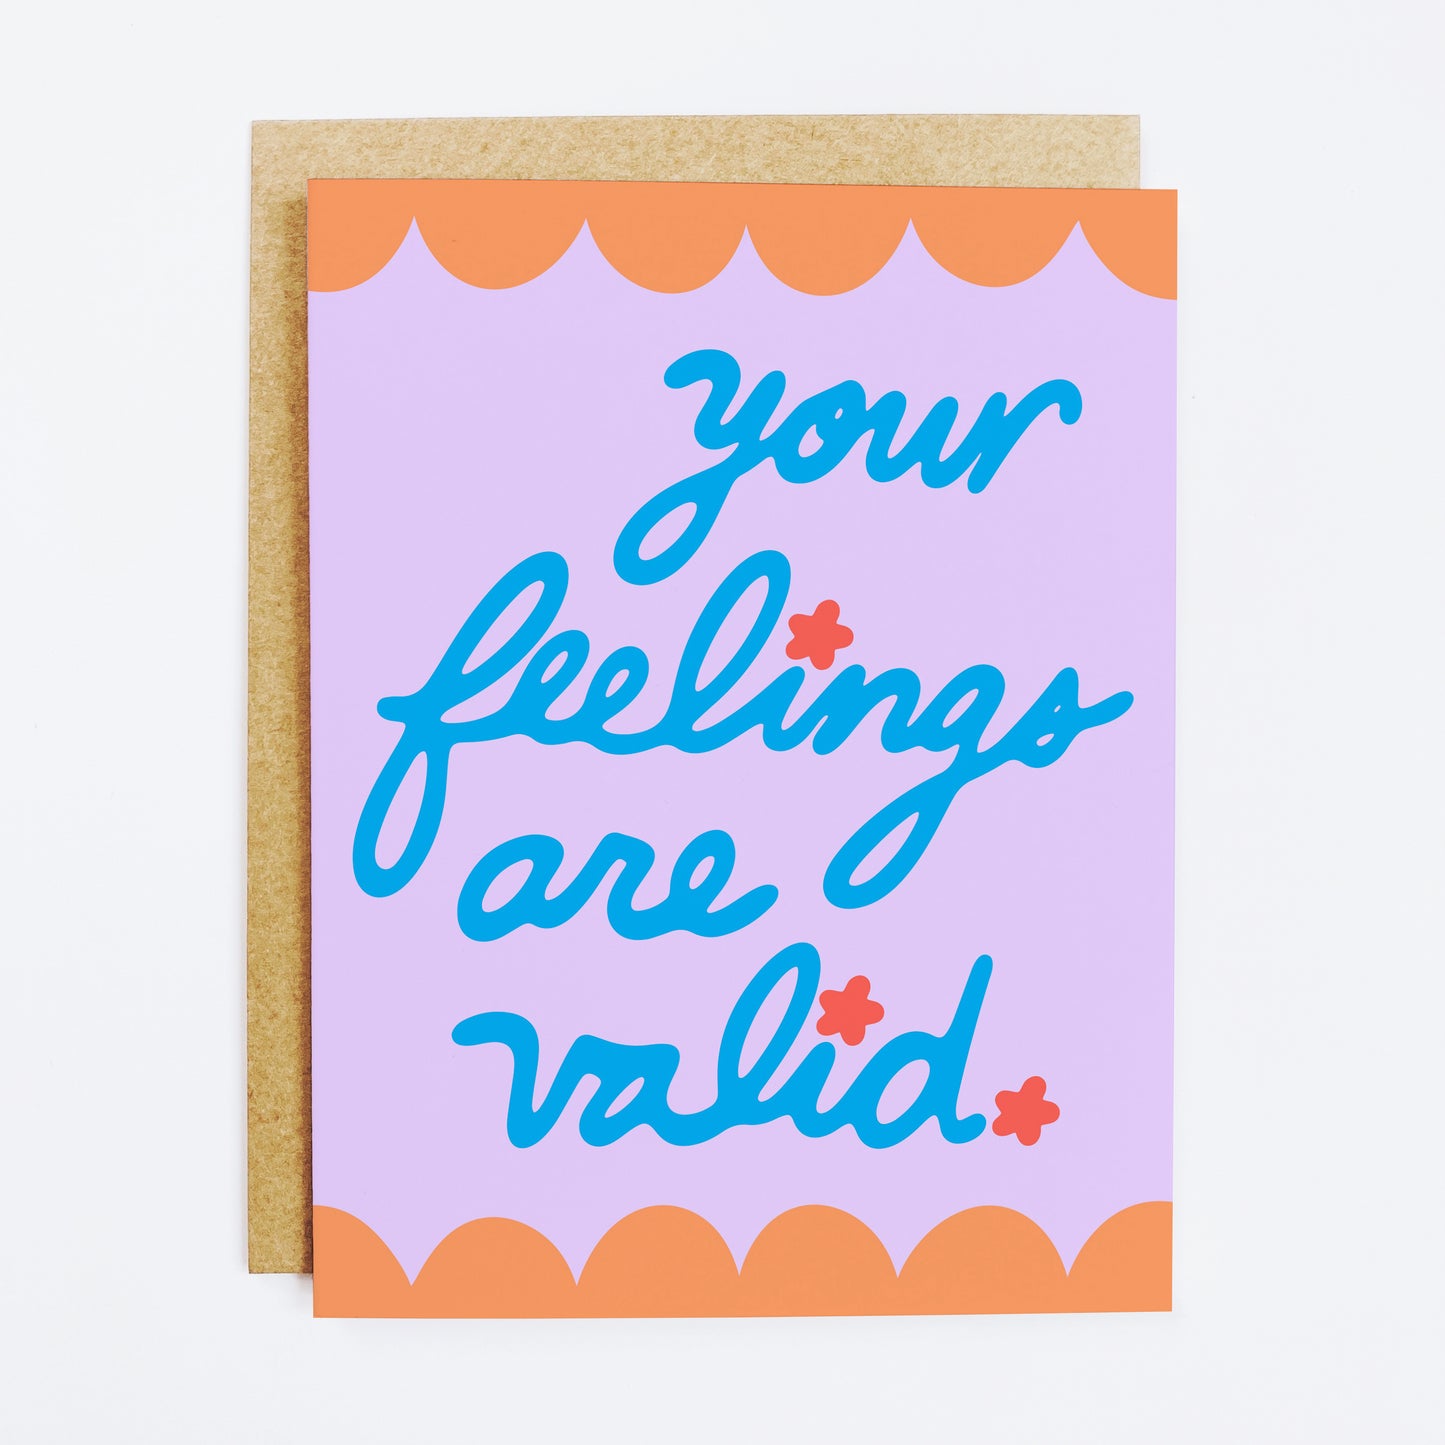 Your Feelings Are Valid Card